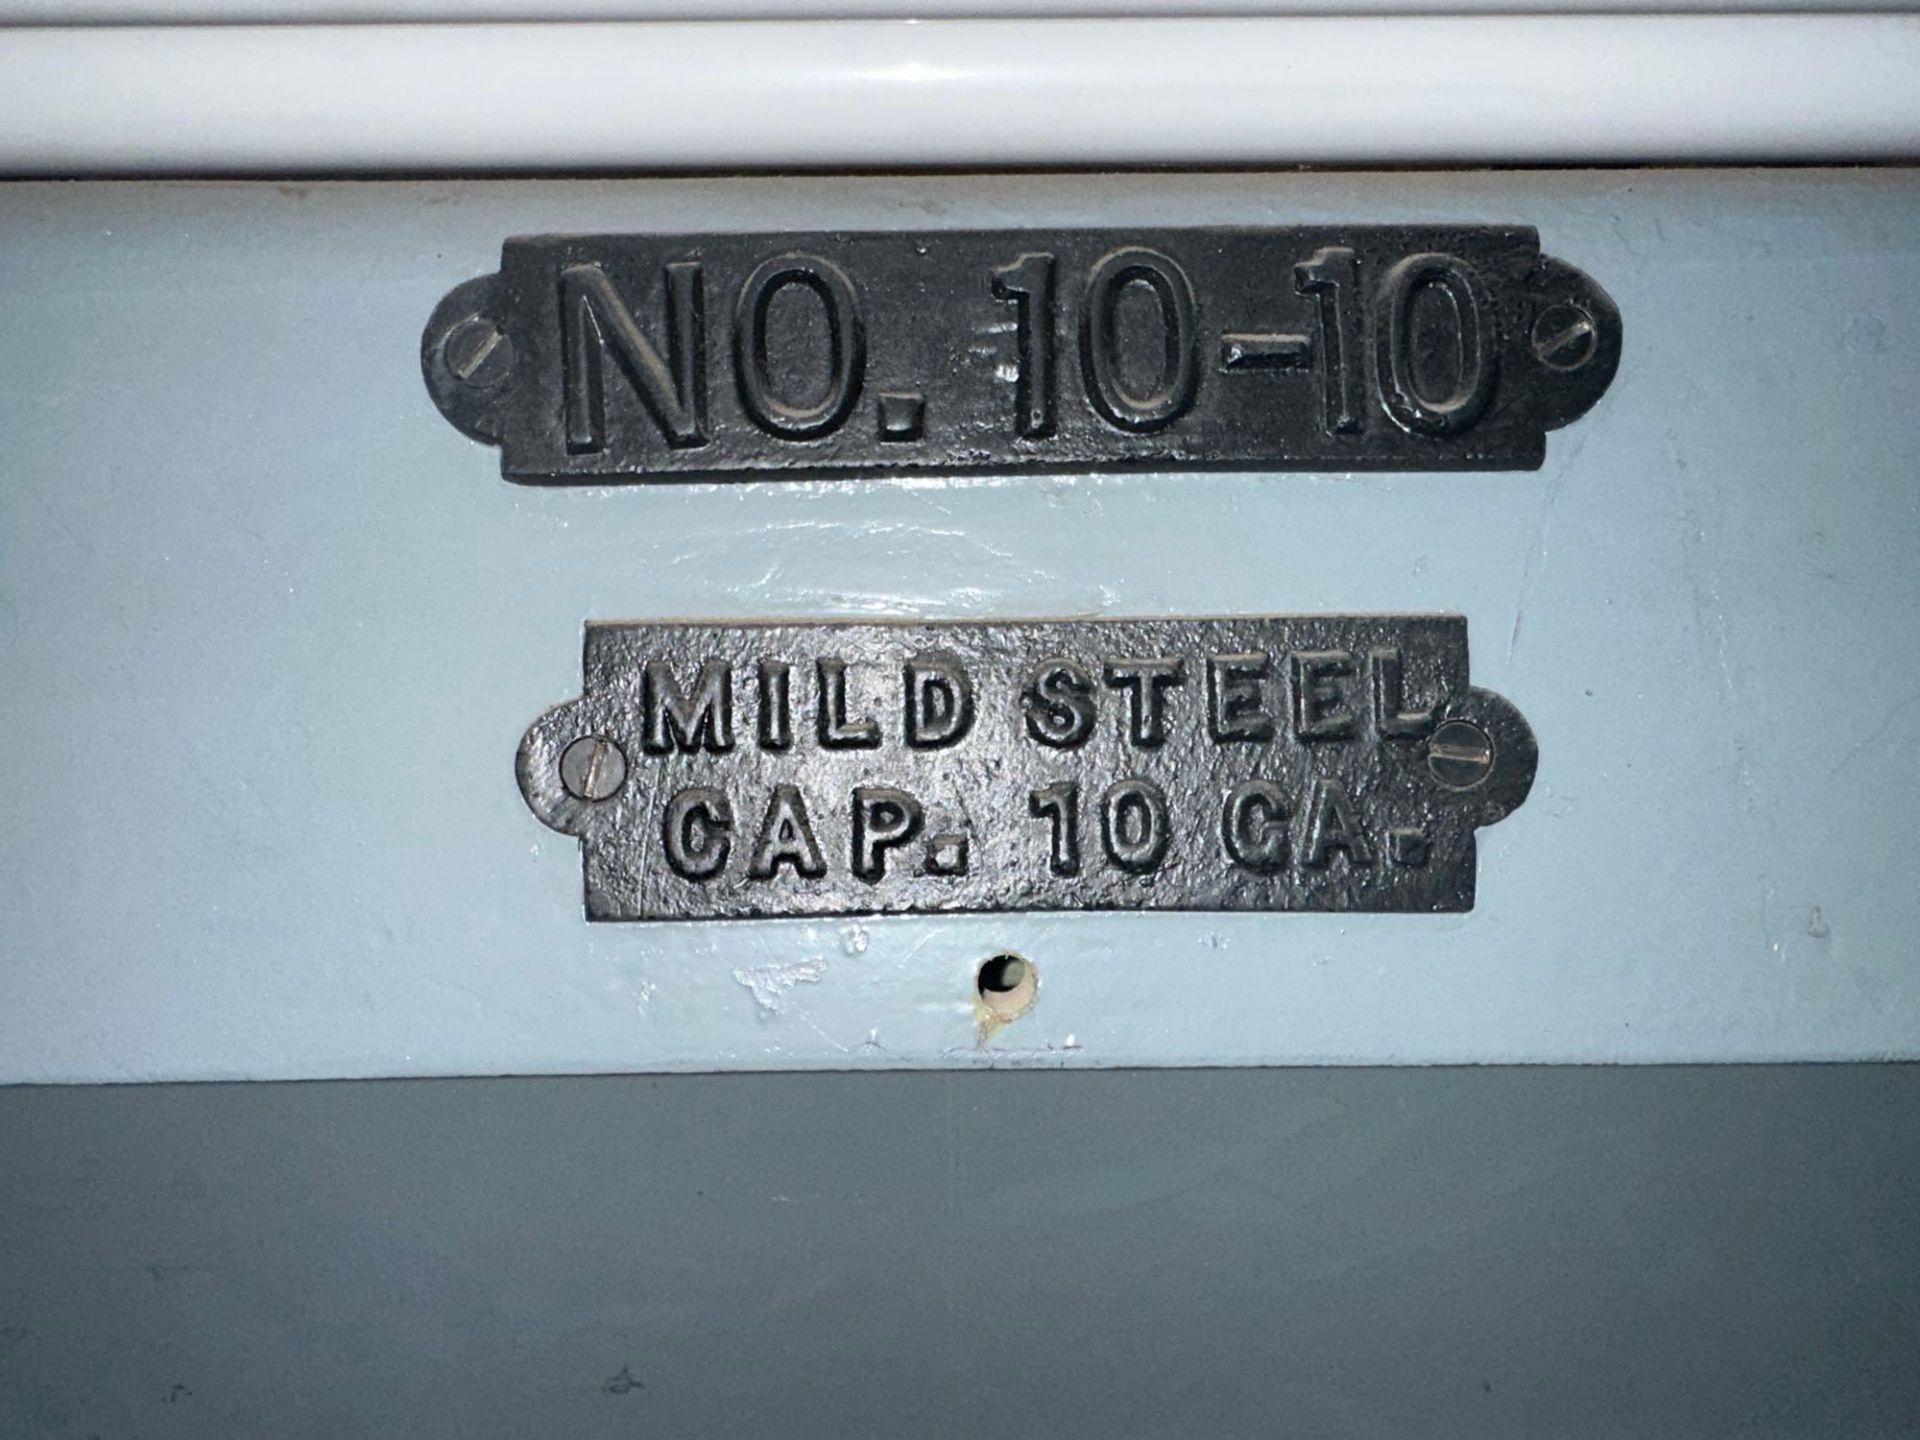 WYSONG MILES NO. 10-10 METAL SHEAR - Image 6 of 6